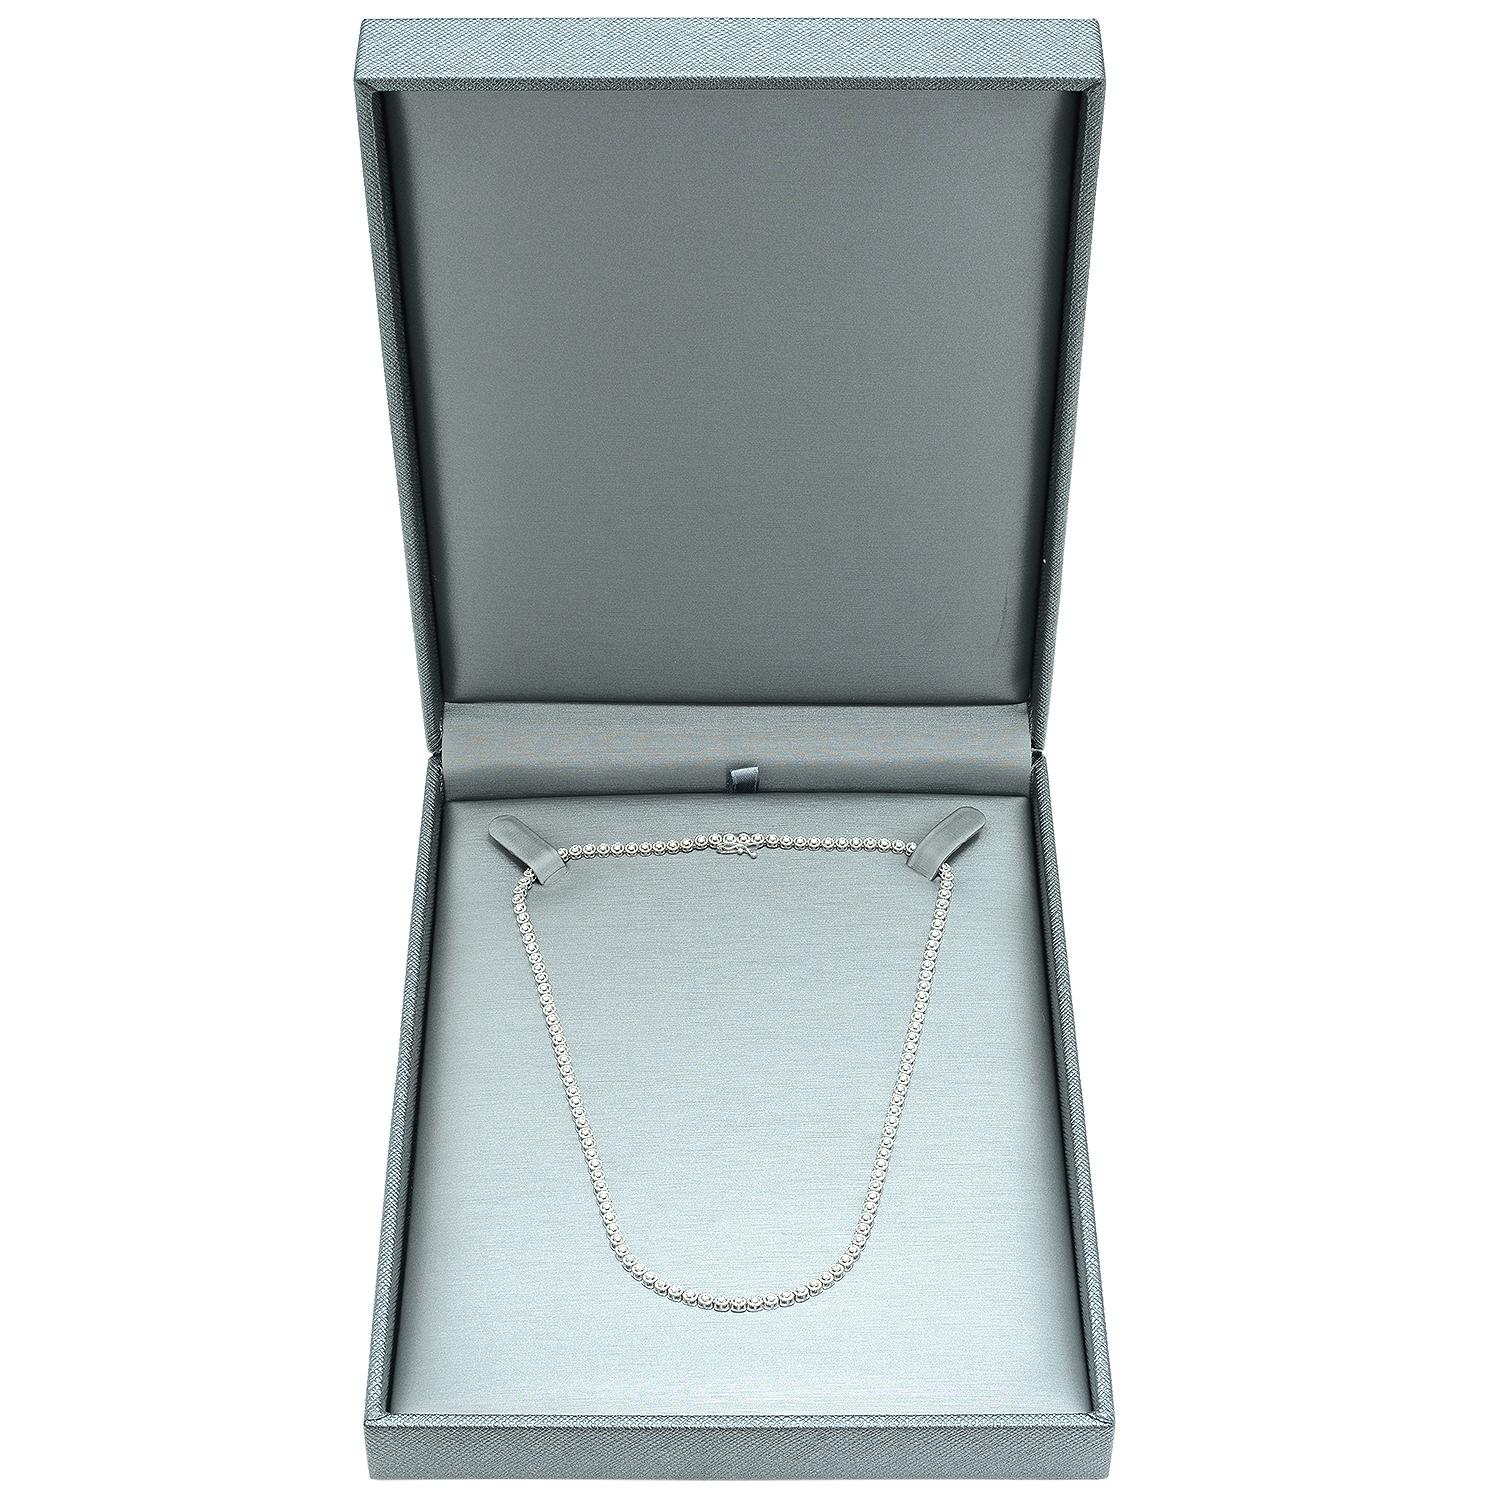 14K White Gold and 2.51ct Diamond Necklace